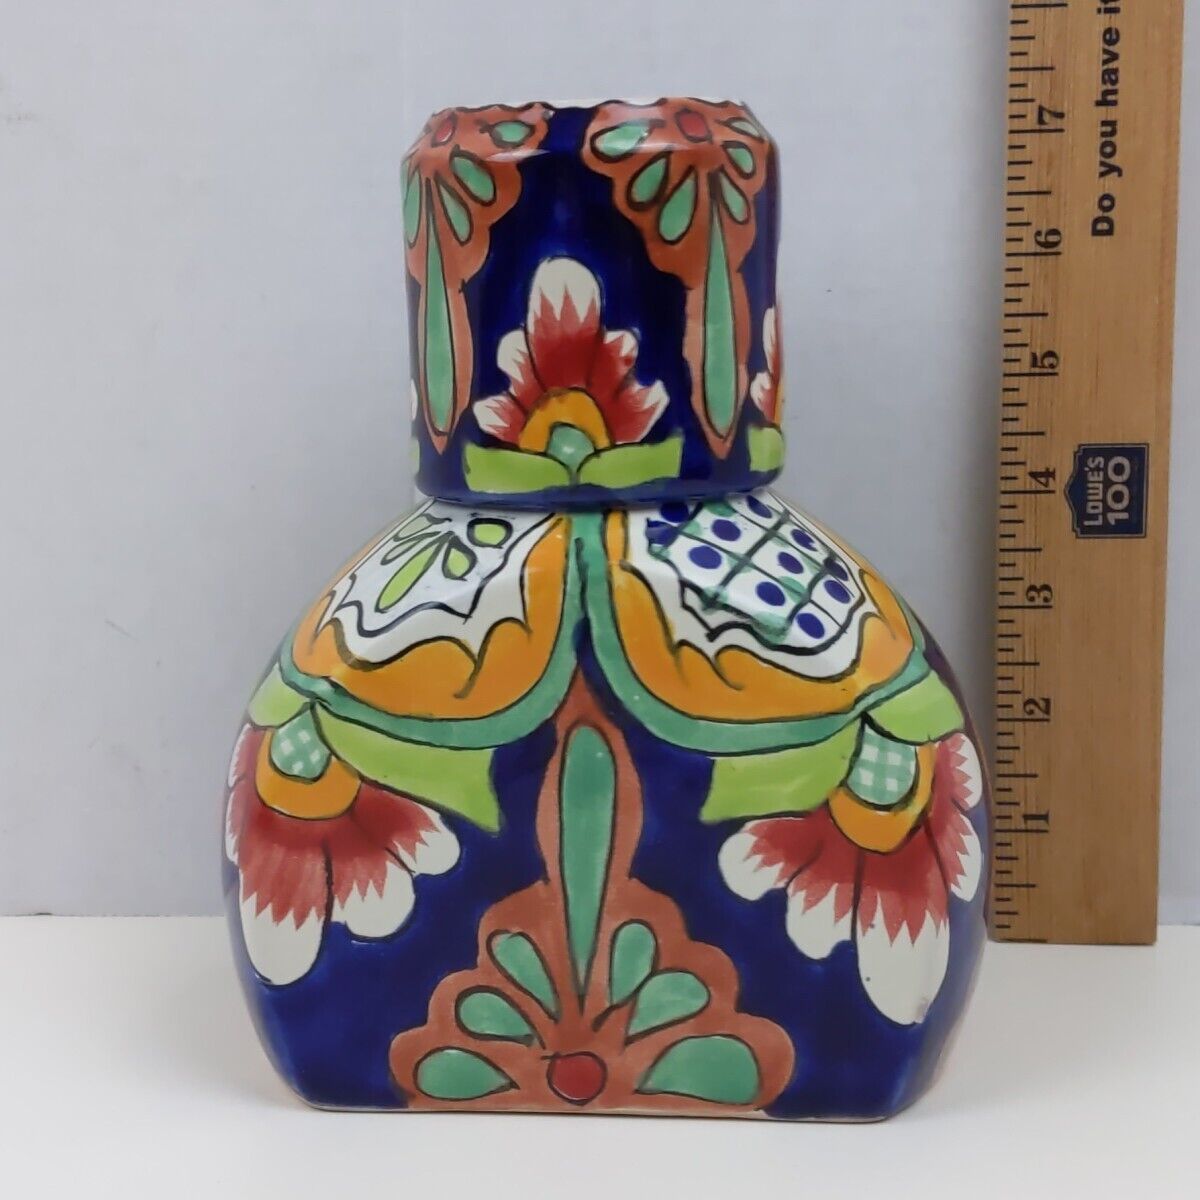 Talavera Tumble Up Mexico Pottery Hand Painted Folk Art Water Carafe & Cup